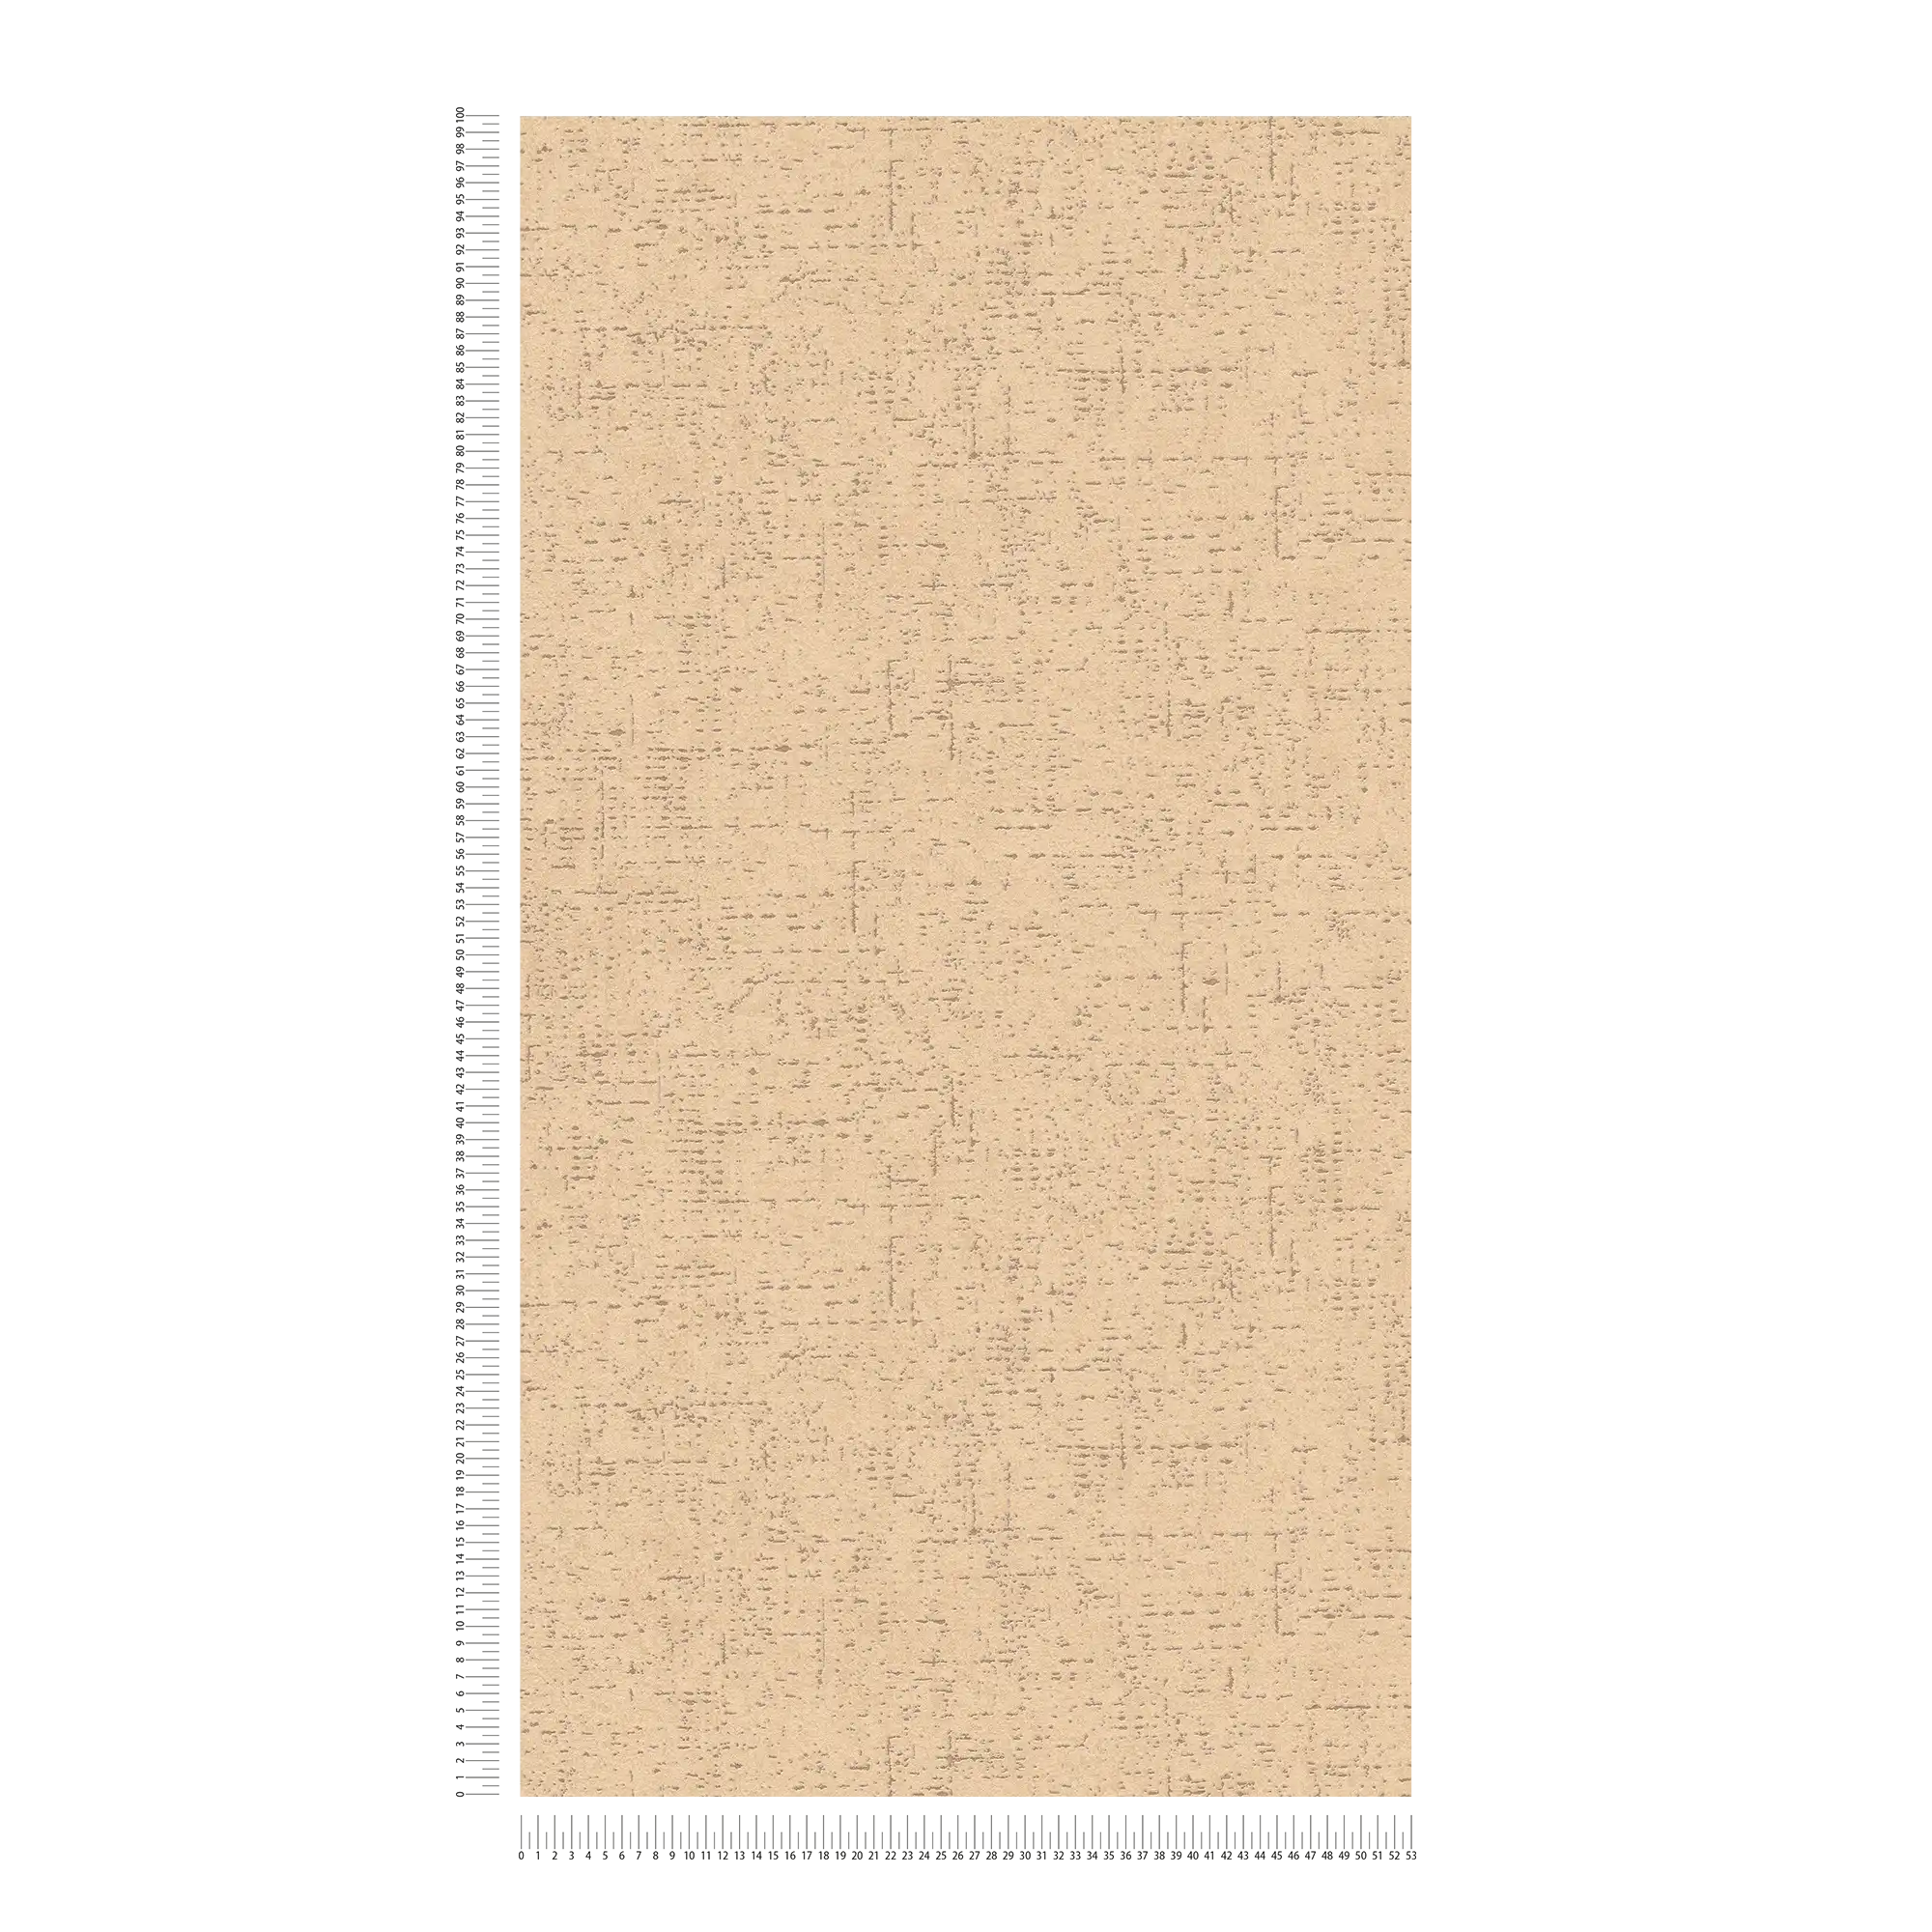             Non-woven wallpaper cork look with textured pattern - beige
        